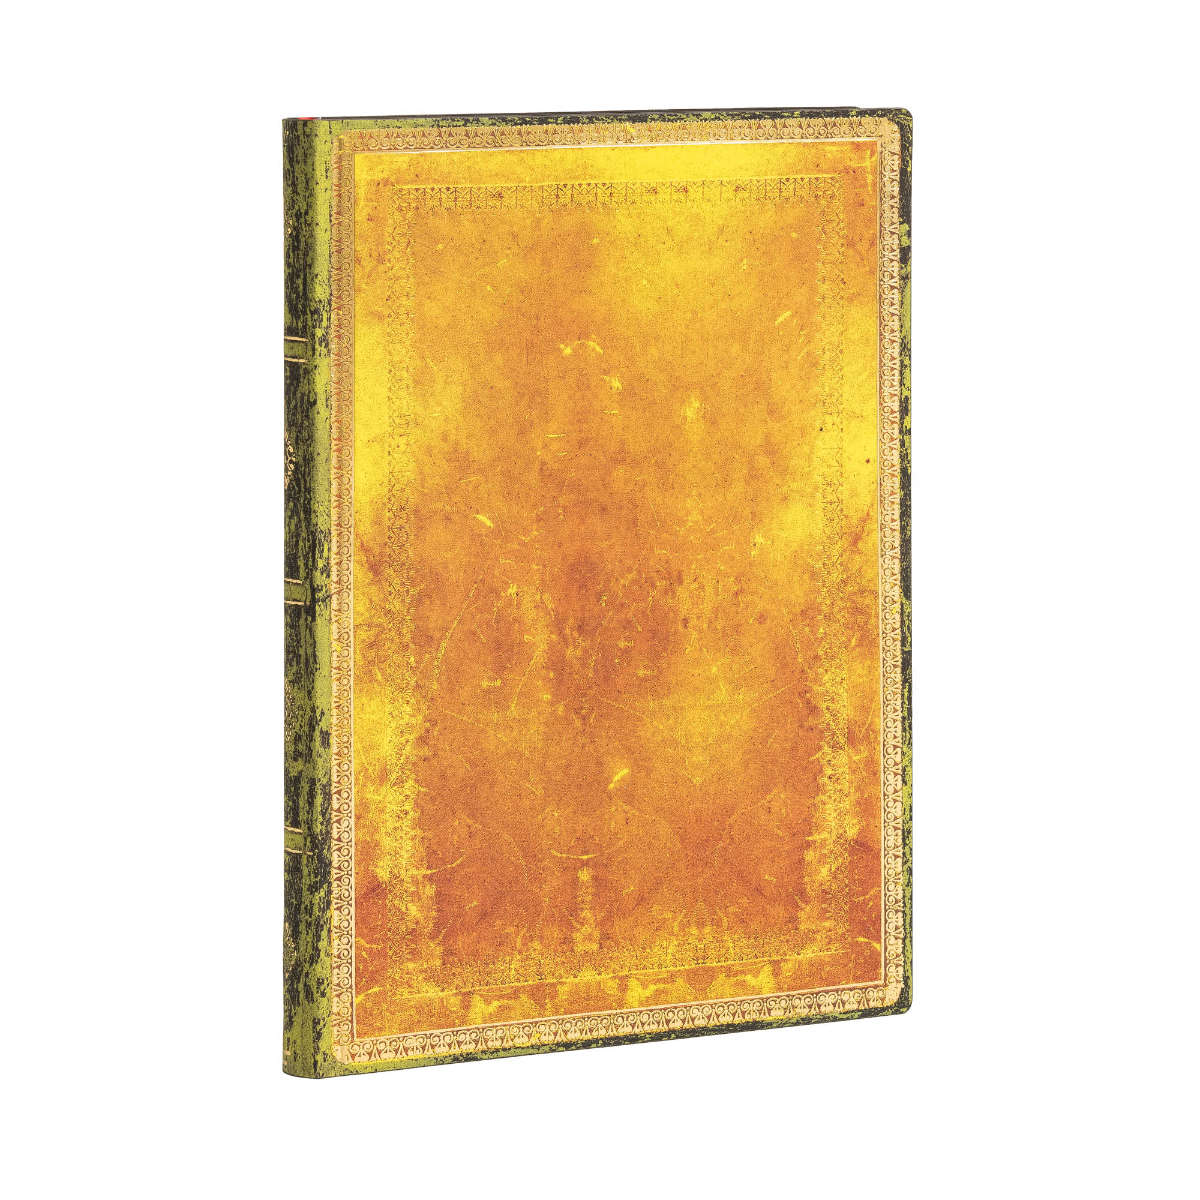 Paperblanks Flexis Old Leather Ochre Midi 5x7 Inch, 176 Pages